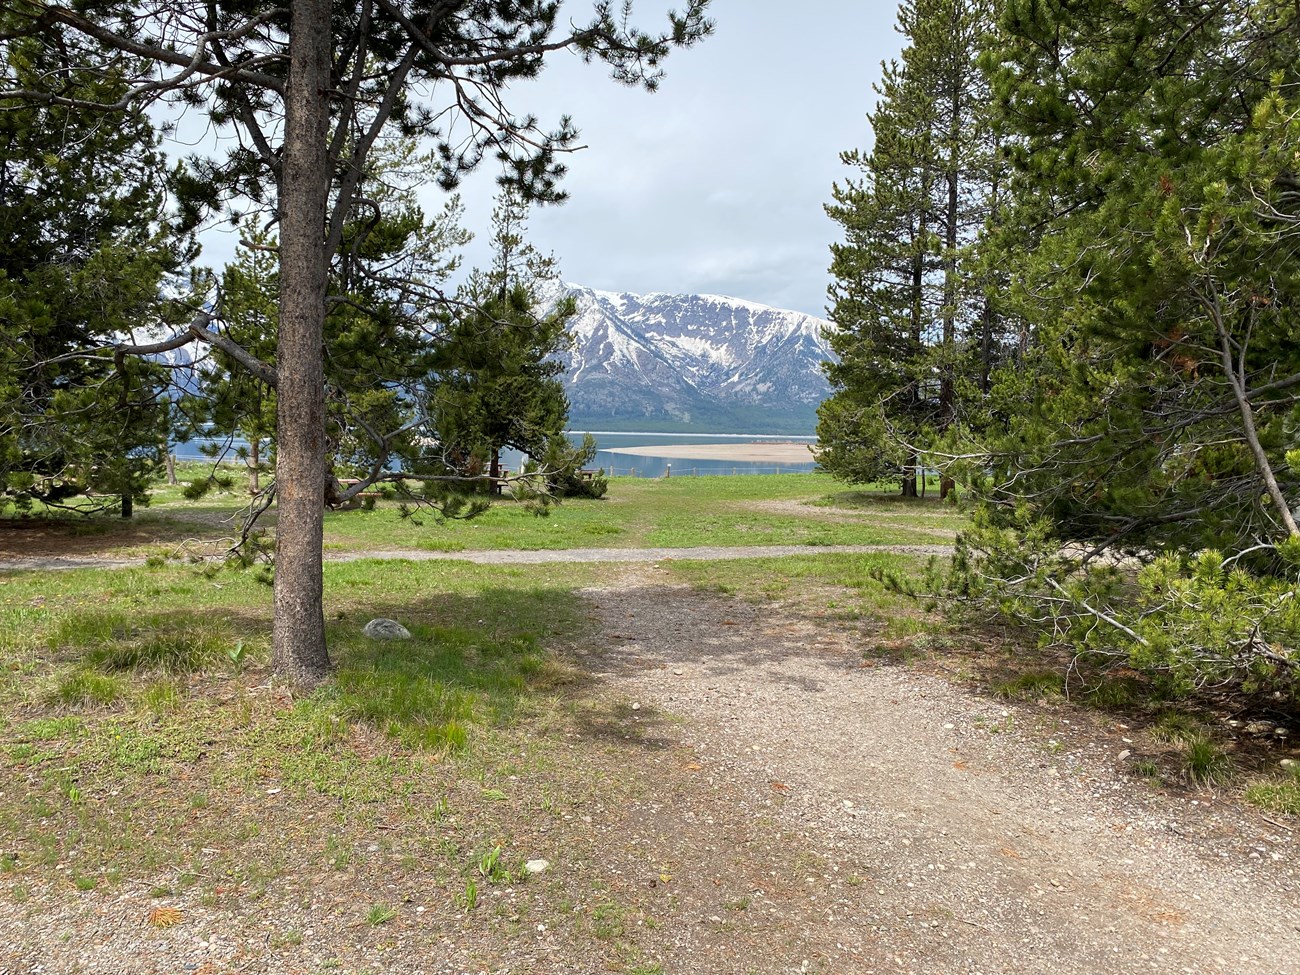 Pathway with trees leading to view of Mount Moran